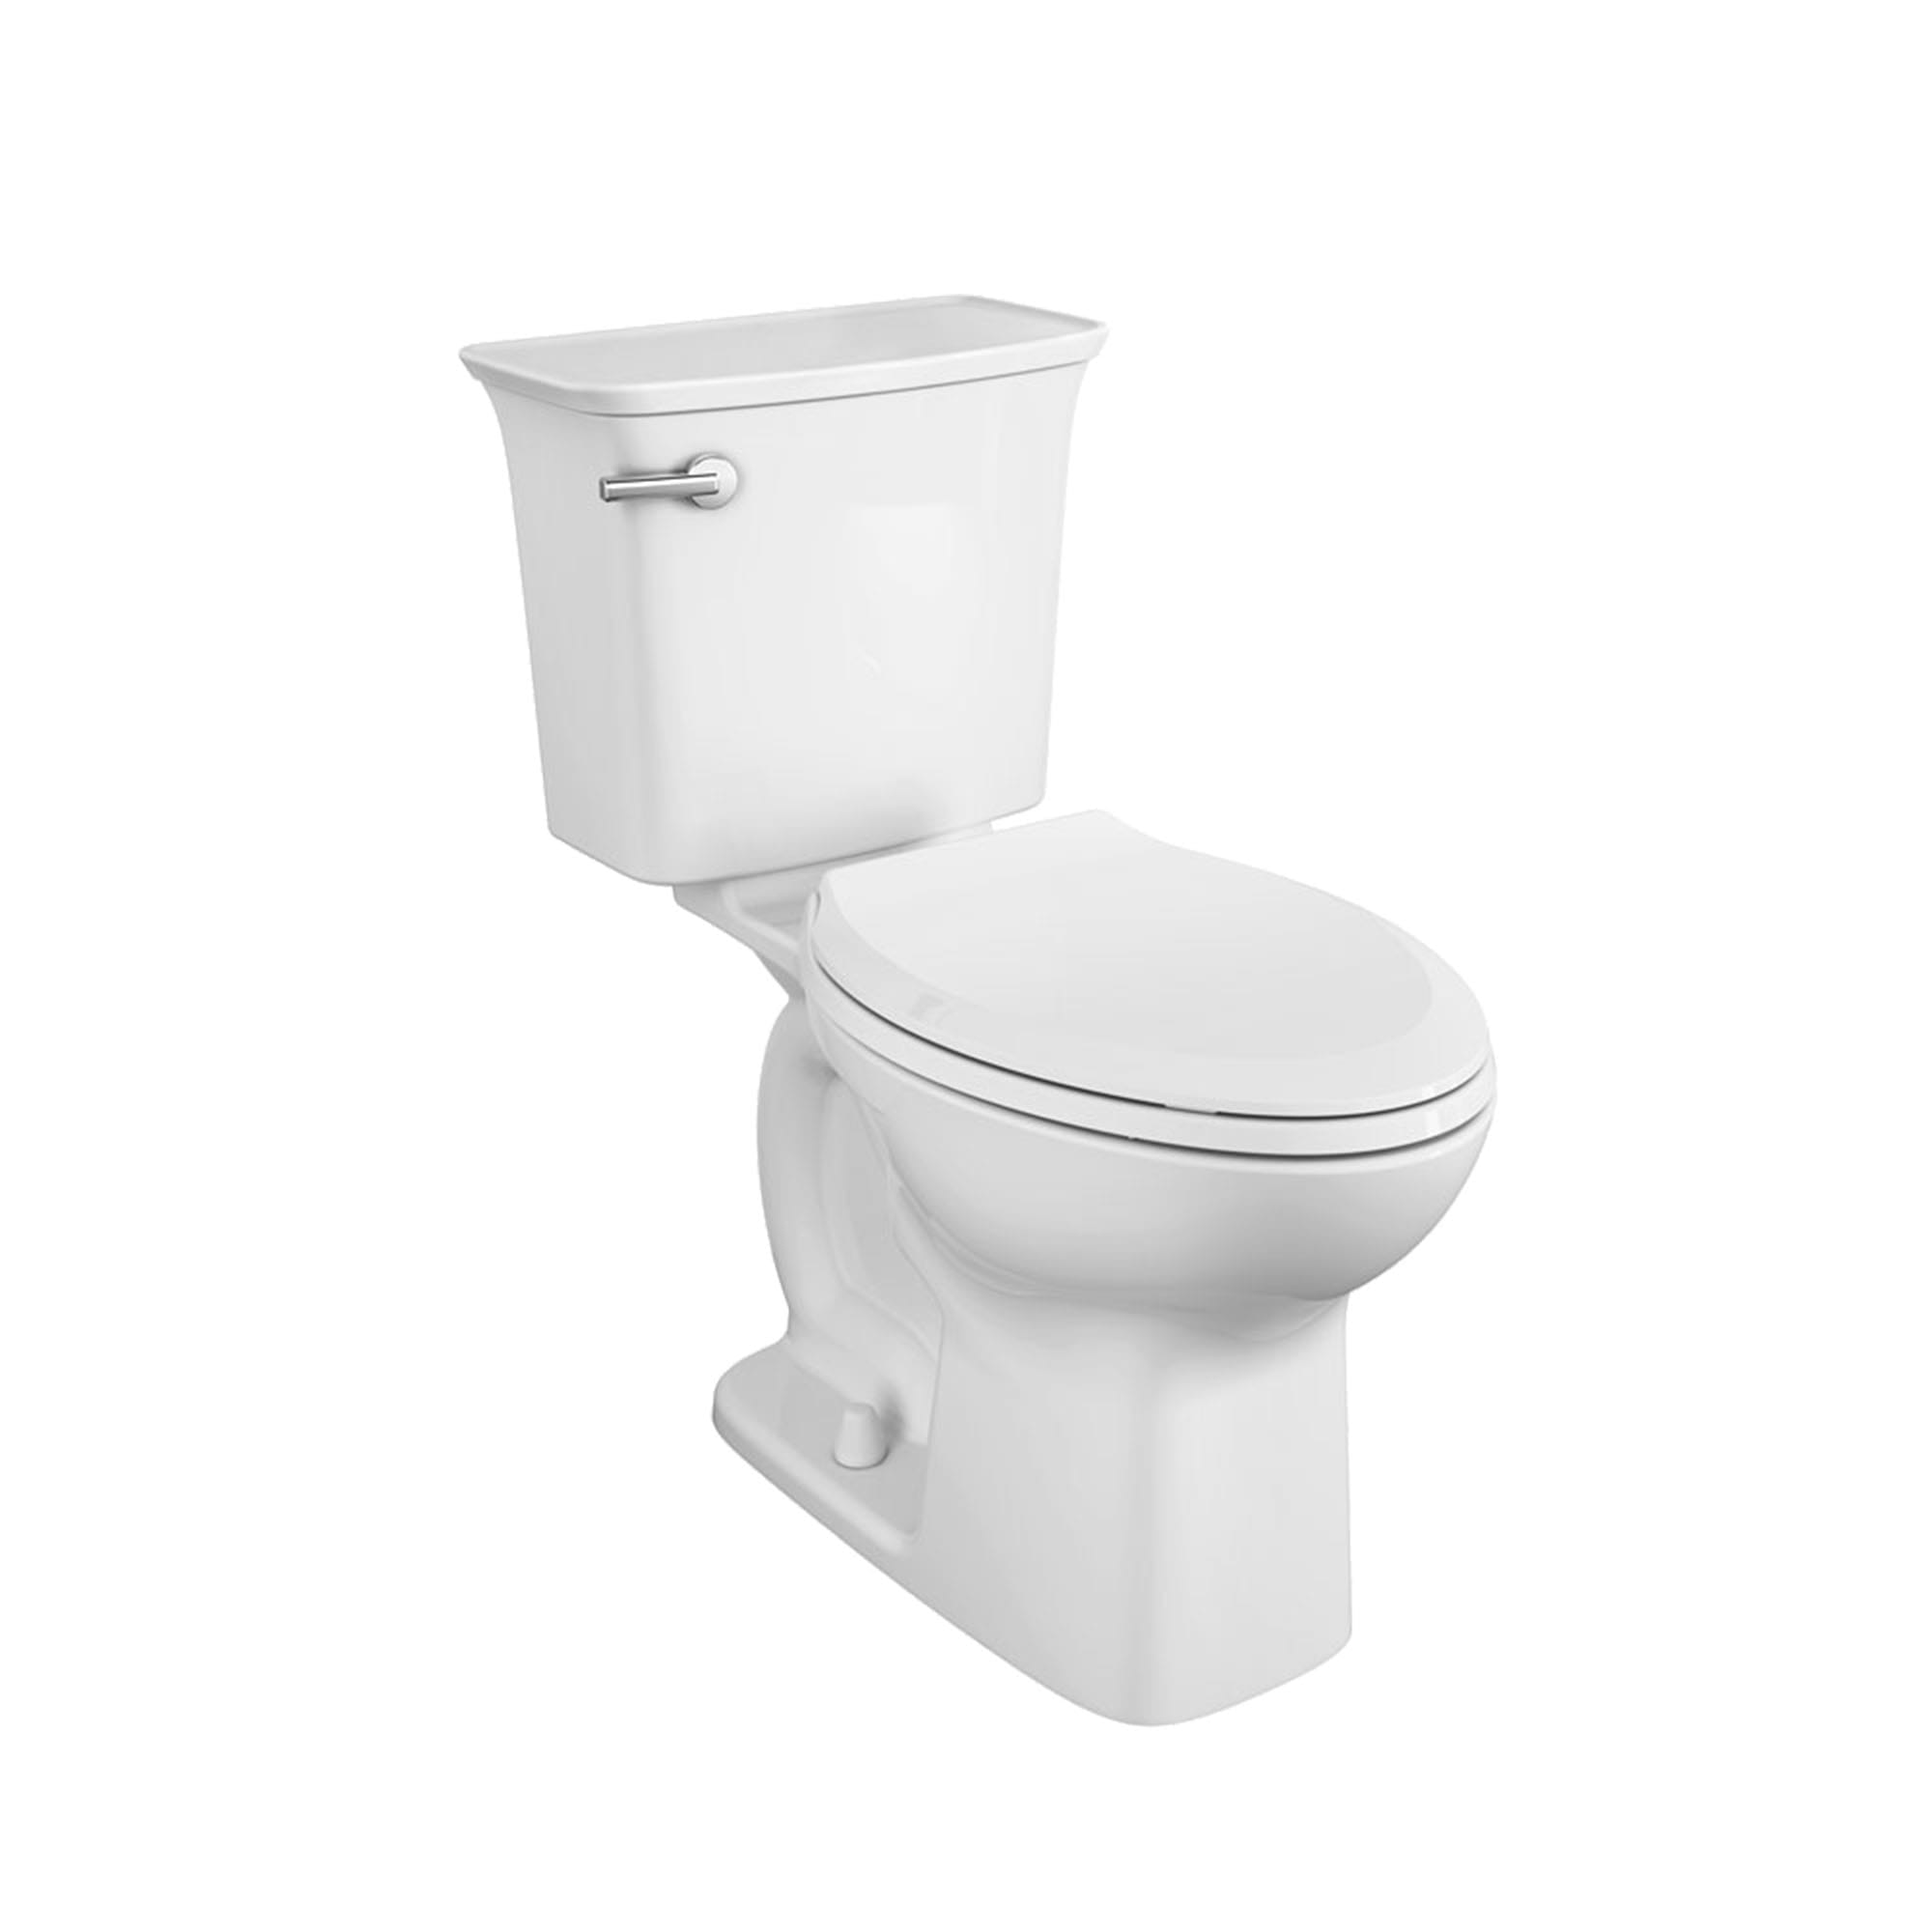 Cadet Ovation 1.28 GPF/4.8 LPF Chair Height Elongated-Front Toilet with Seat